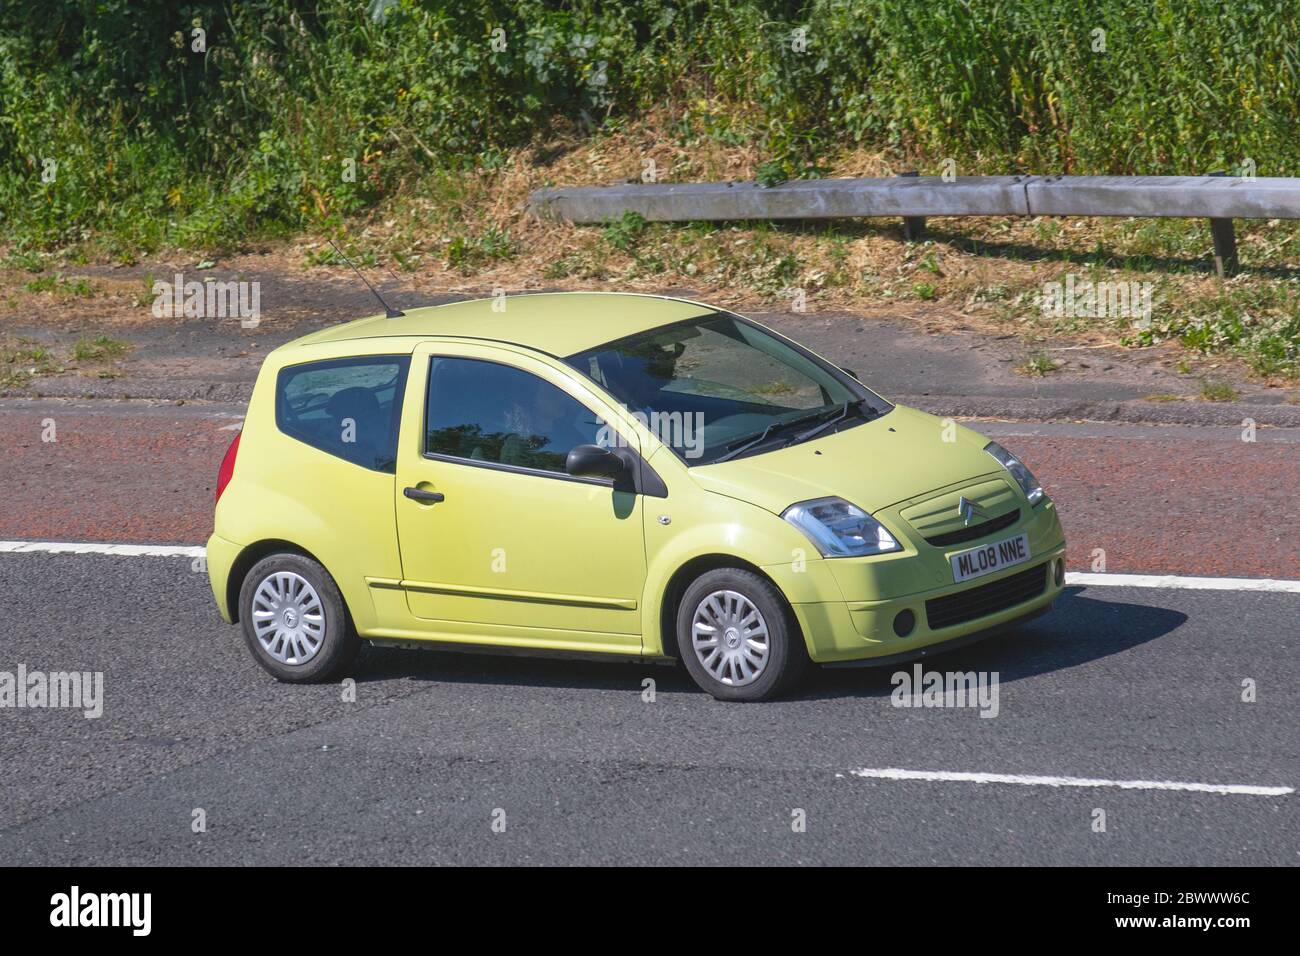 2008 yellow Citroën C2 Cool 2dr small city car ; Vehicular traffic moving vehicles, cars driving vehicle on UK roads, motors, motoring on the M6 motorway highway Stock Photo